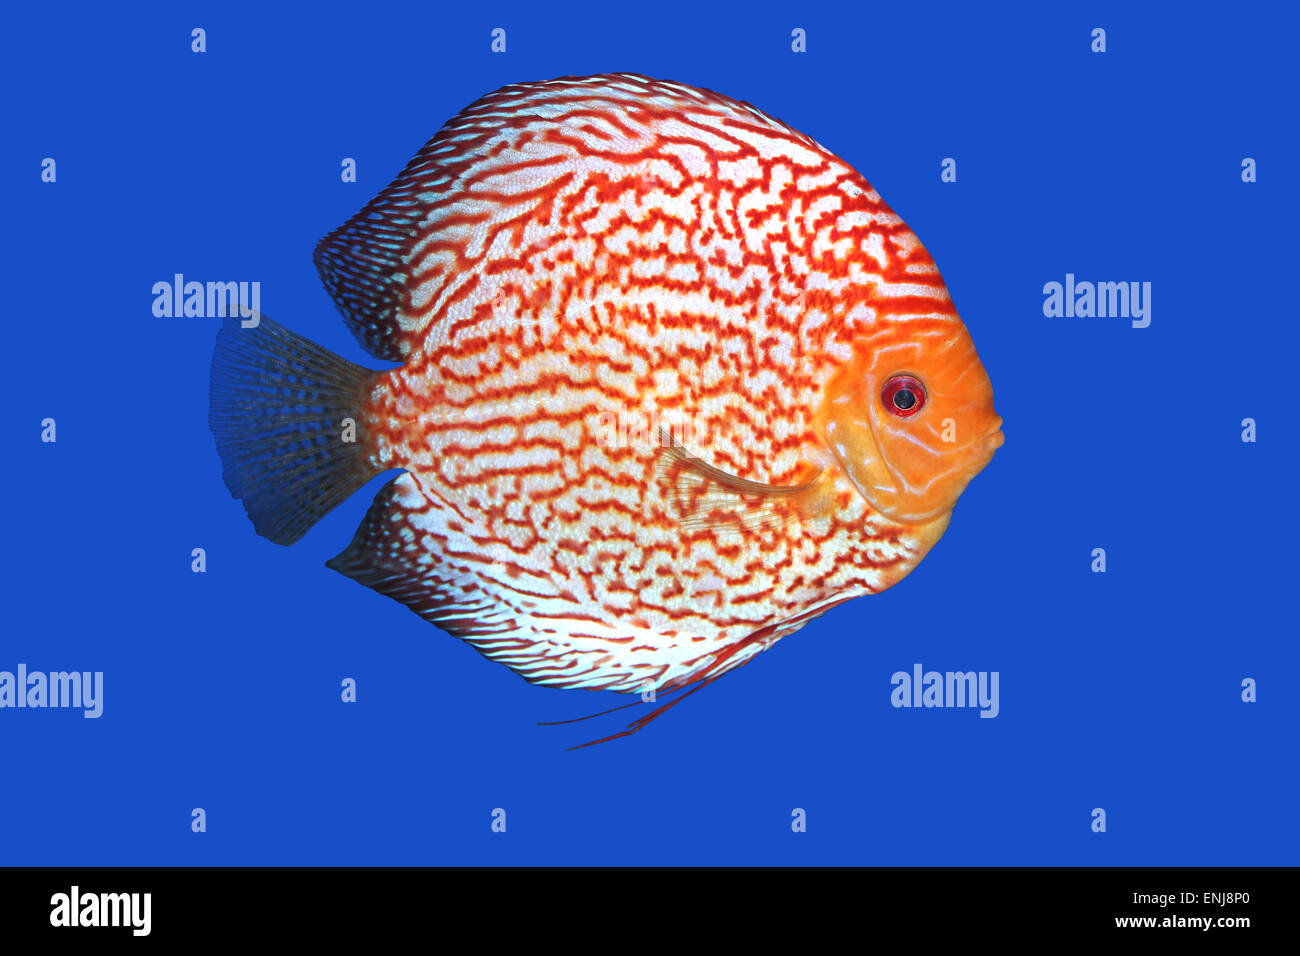 Checkerboard Discus fish in a blue background Stock Photo